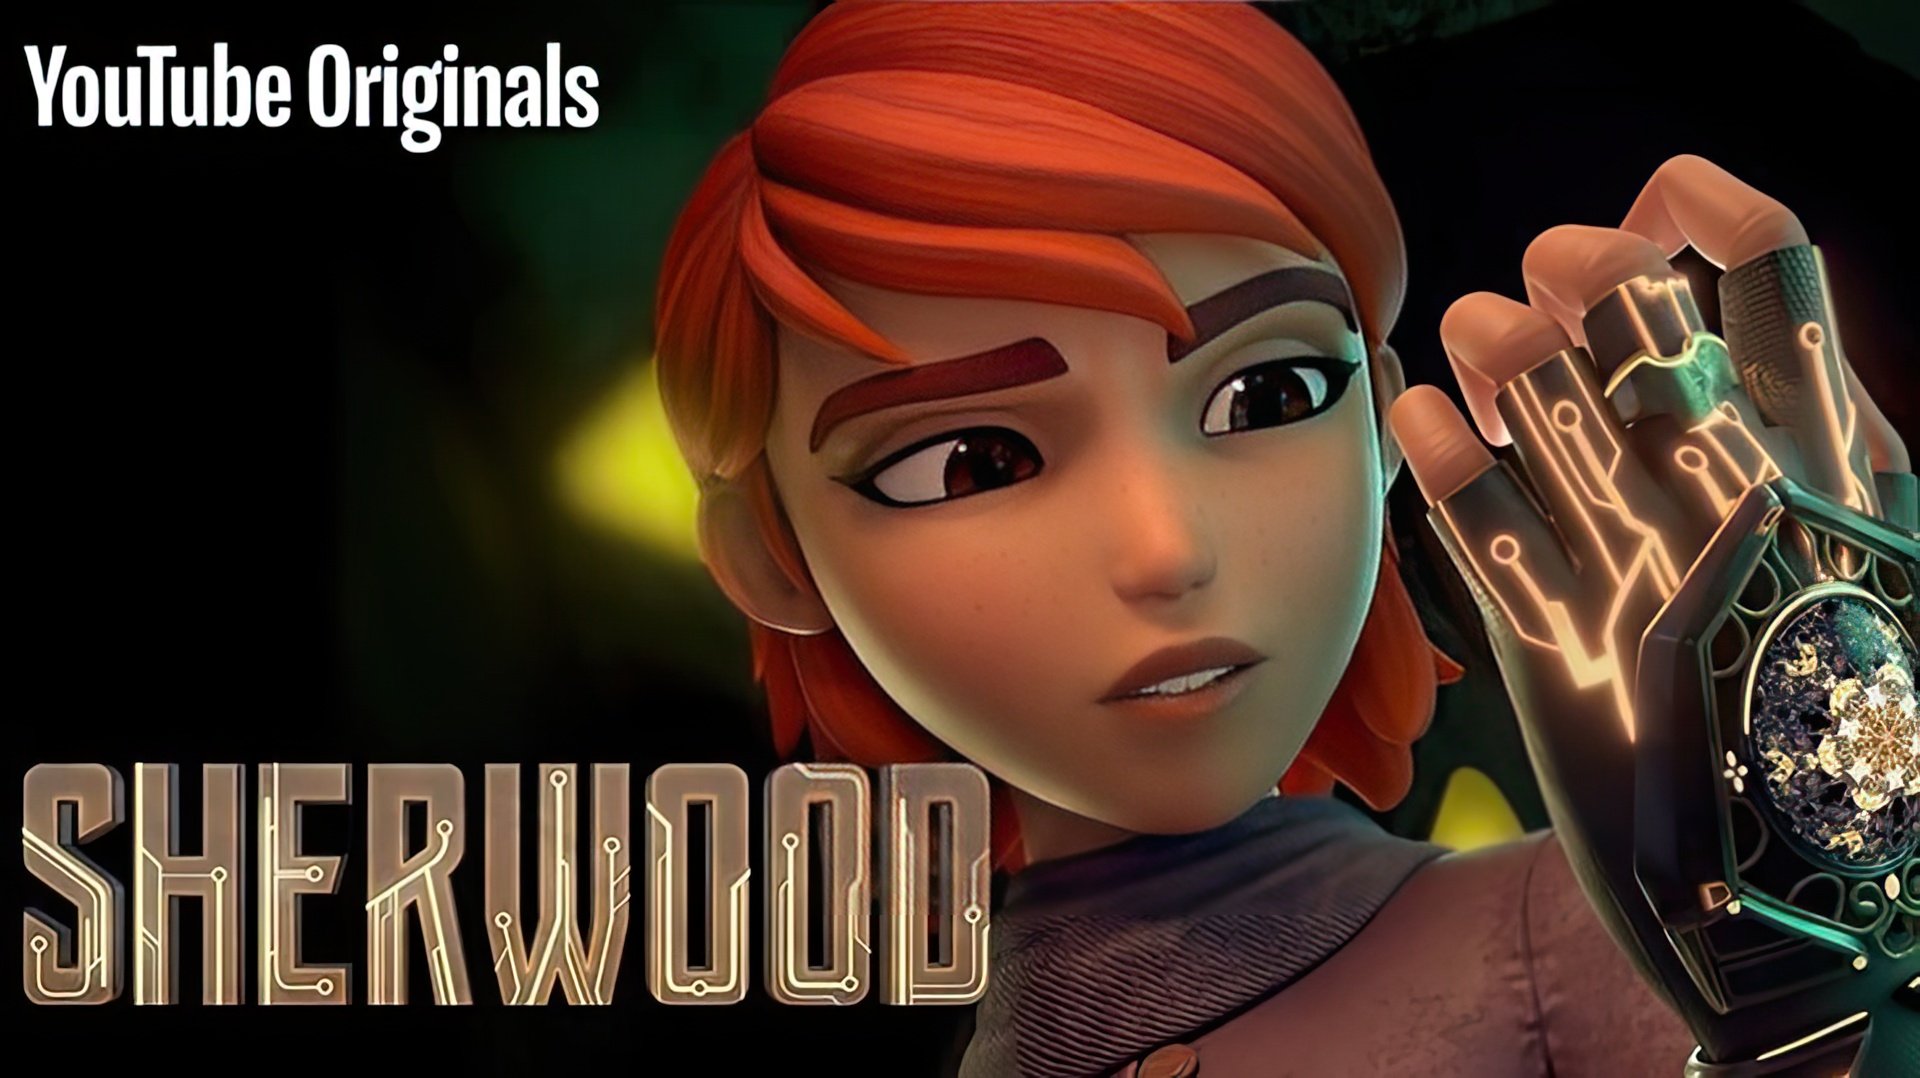 In 2019, Anya Chalotra voiced Robin Loxley in the animated series Sherwood